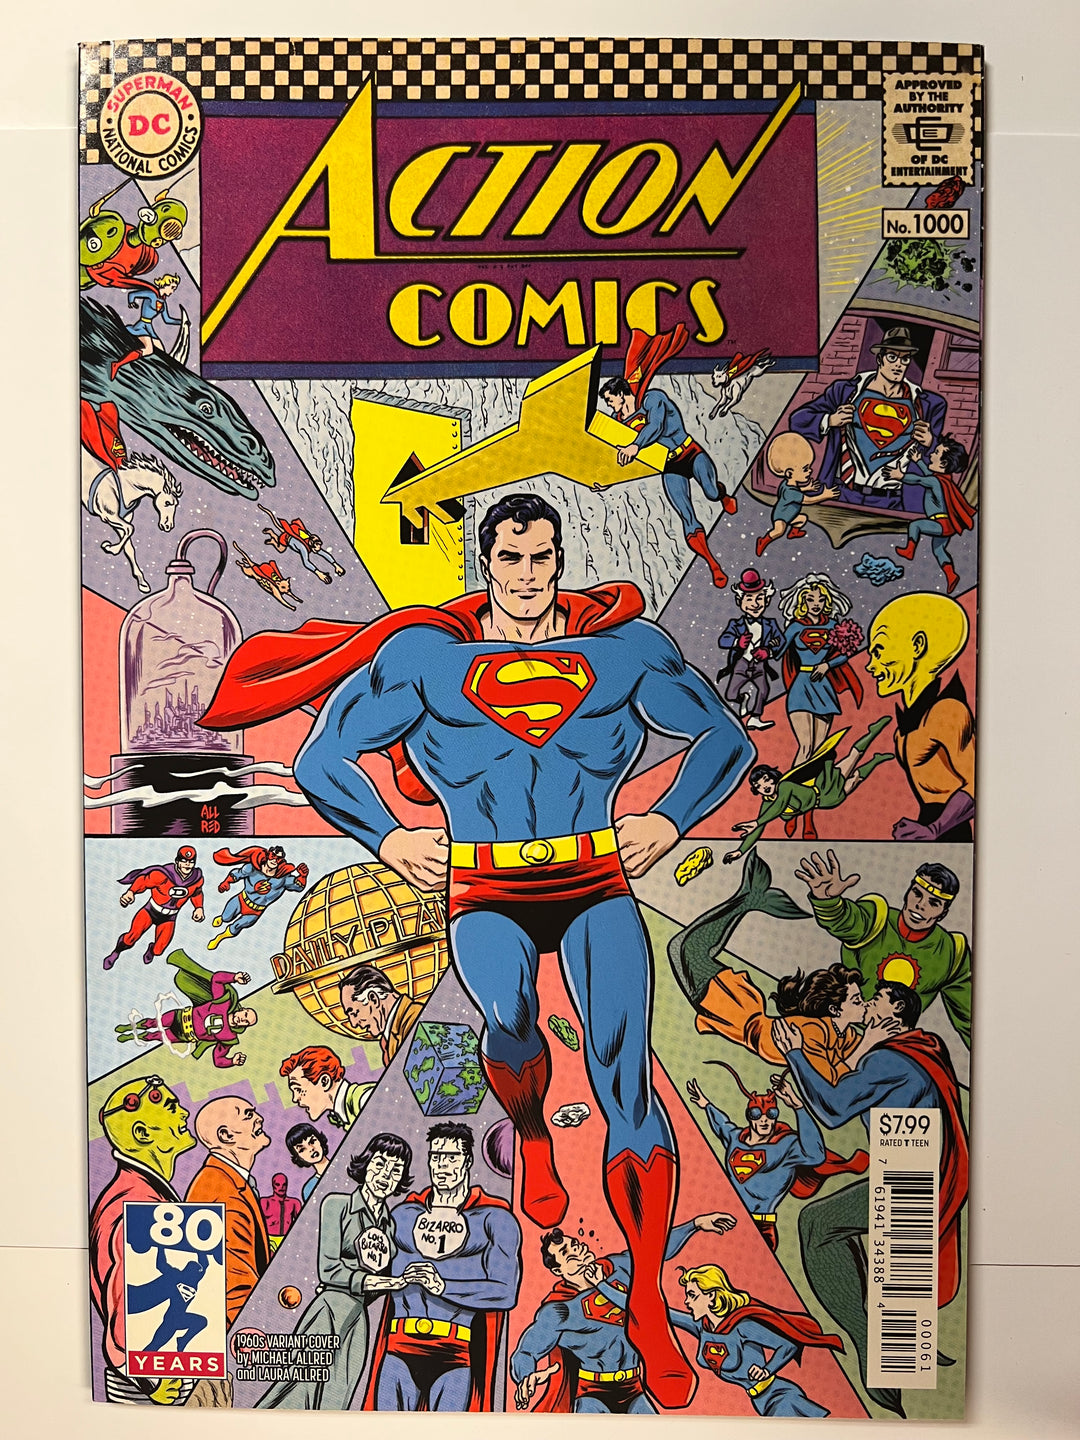 Action Comics #1000 '1960s' Variant Cover DC 2018 NM